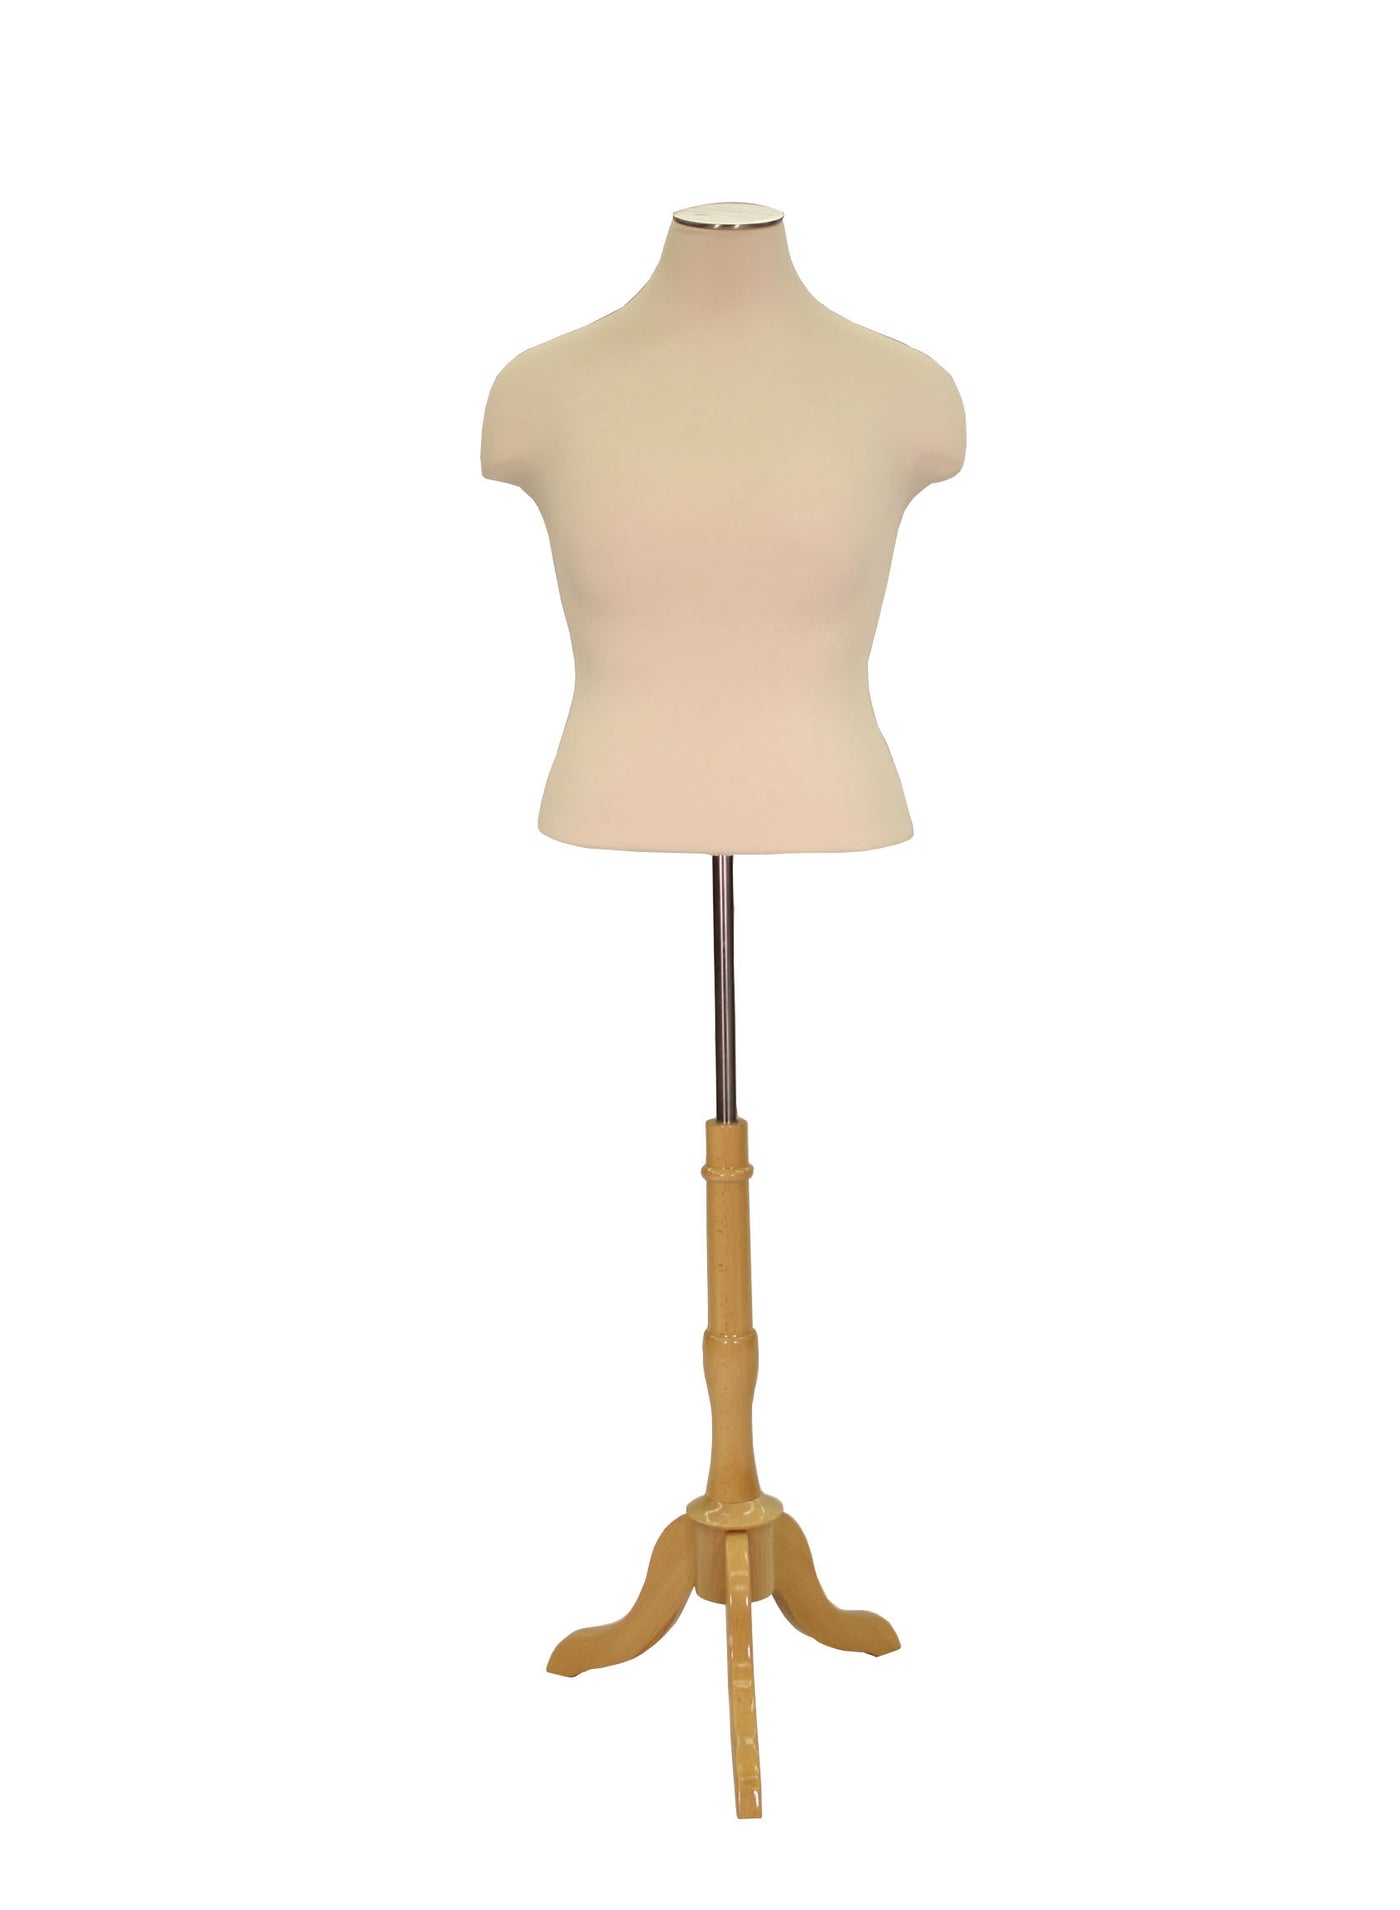 Plus Size Body Form White Jersey with Wooden Tripod Base